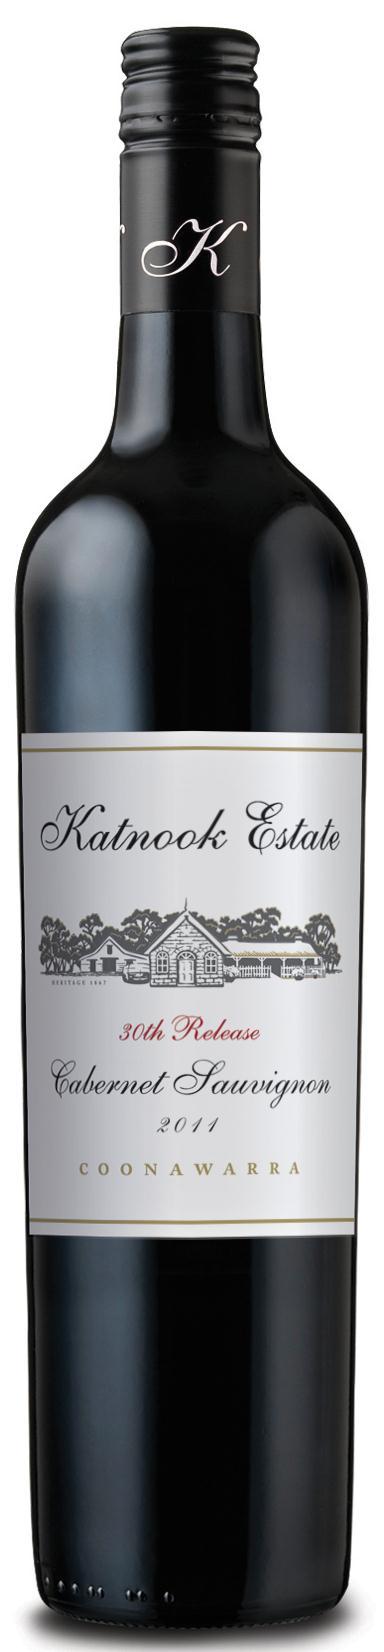 Cabernet Sauvignon 2011 wines are an expression of the classic and unique characteristics crafted the Katnook Estate range from selected distinguished vineyards, with a philosophy that reflects the